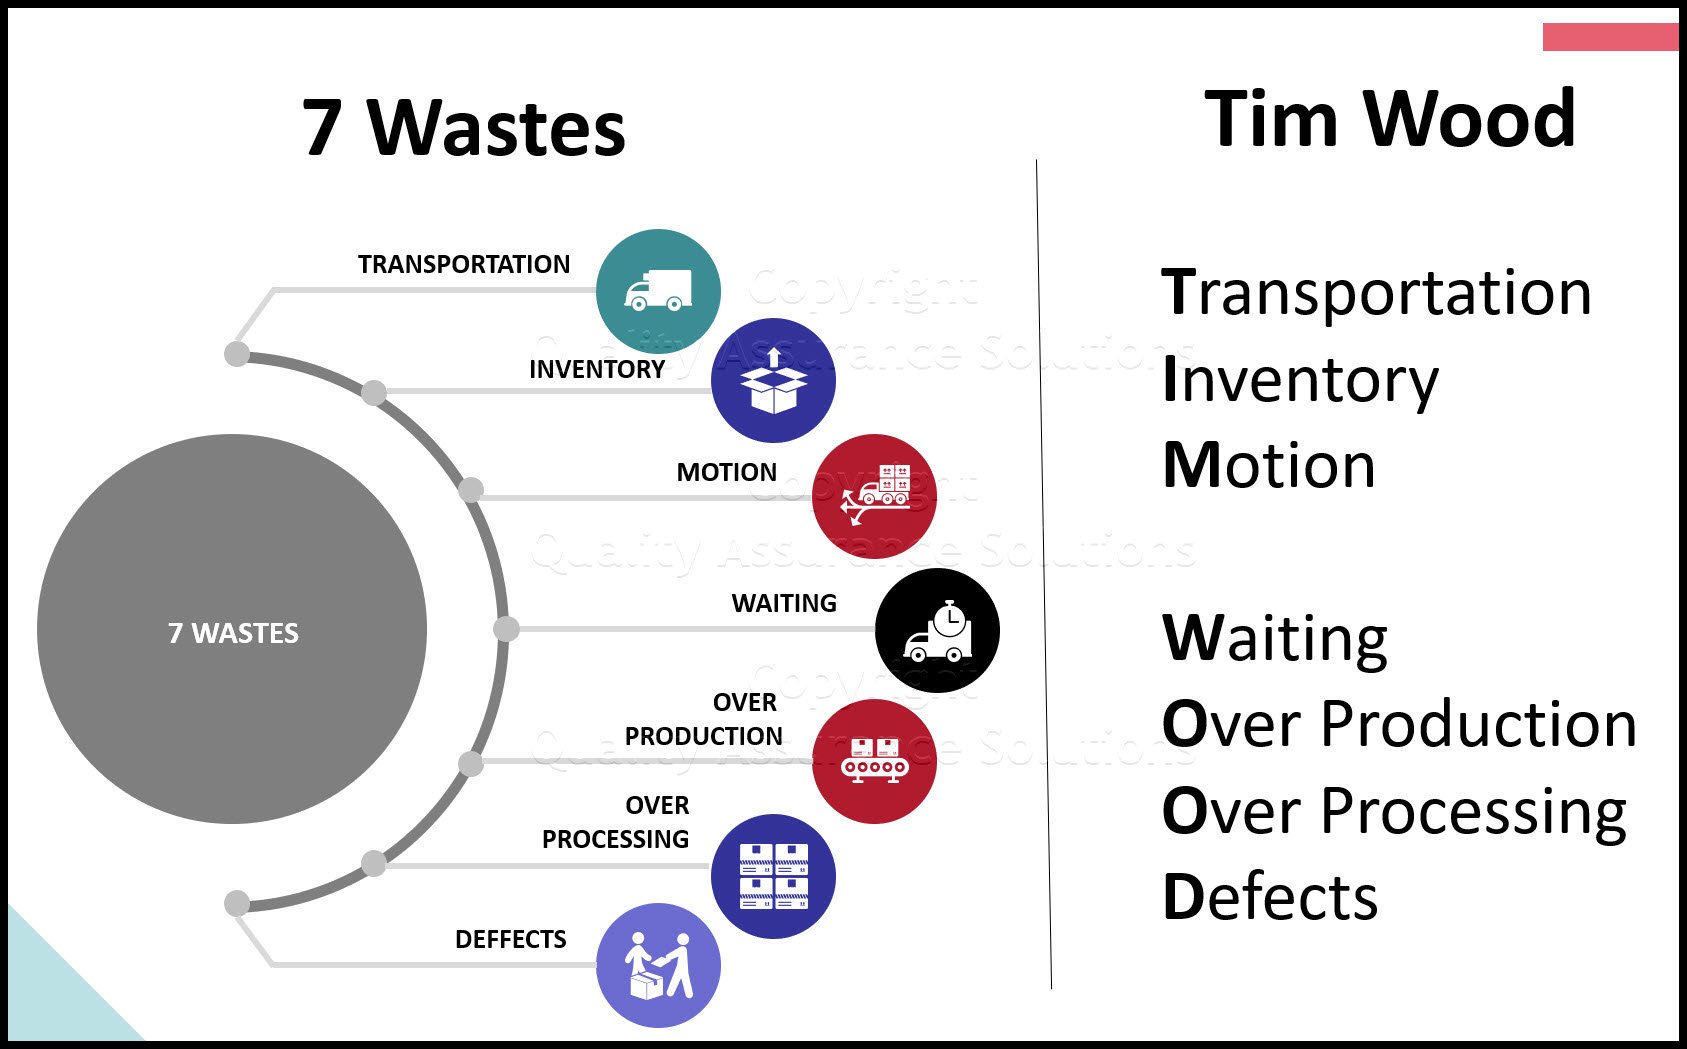 Learn the 7 wastes of Lean, the Tim Wood acronym, and how they affect your company's bottom line and the actions to counter these wastes.